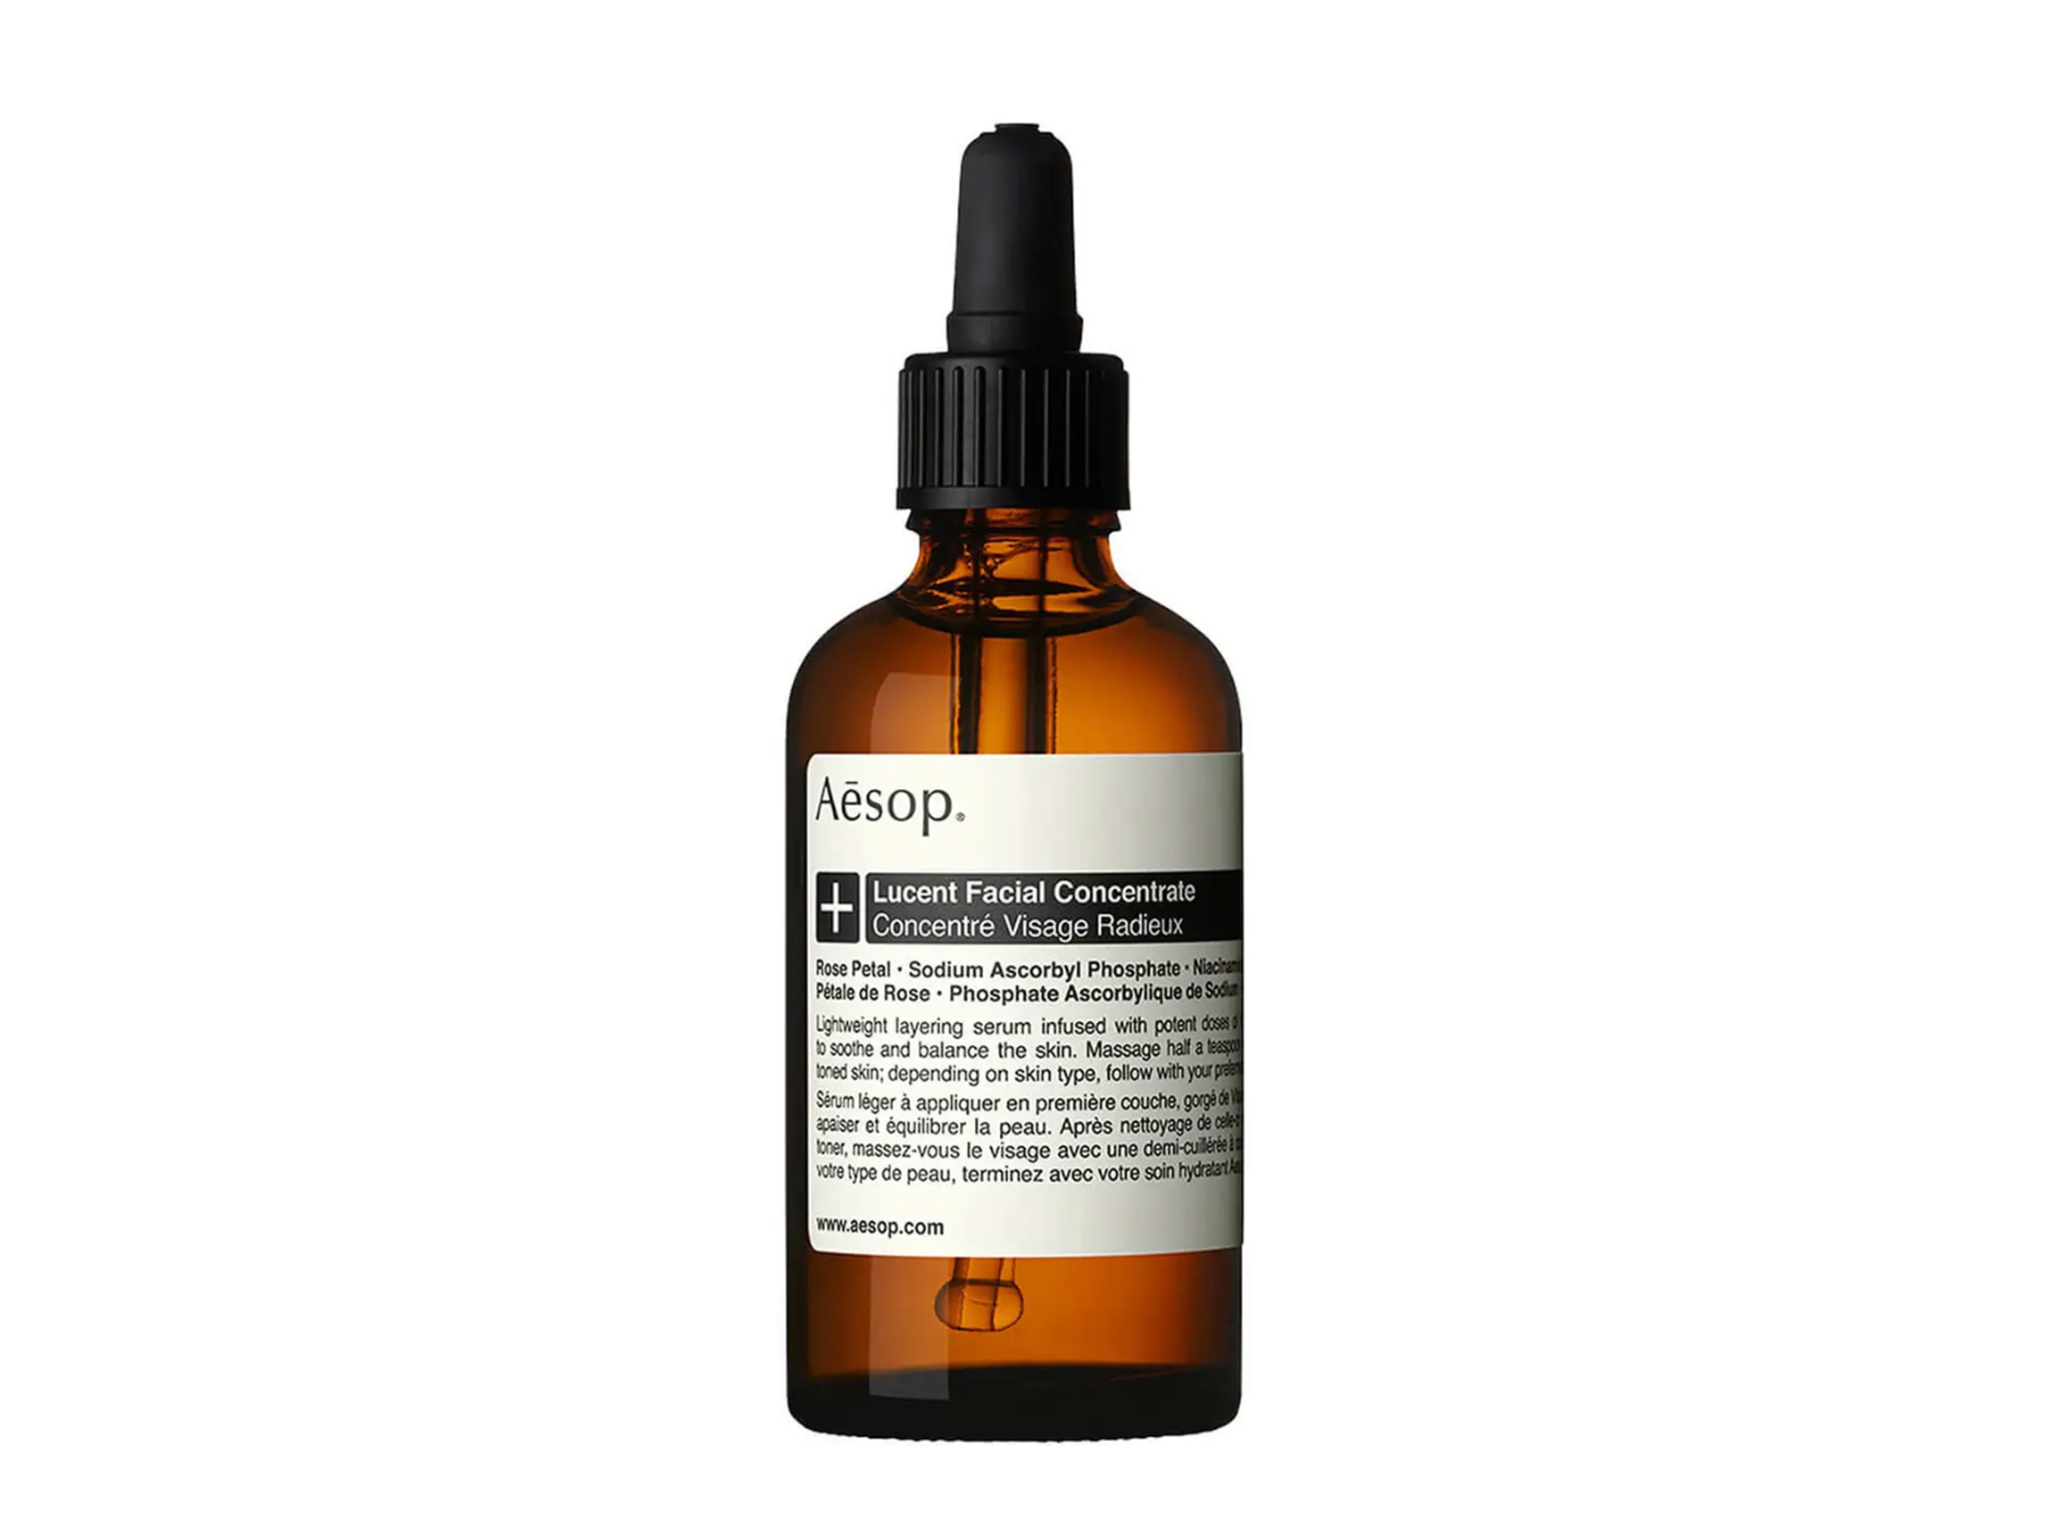 best vitamin c serum indybest review Aesop lucent facial concentrate